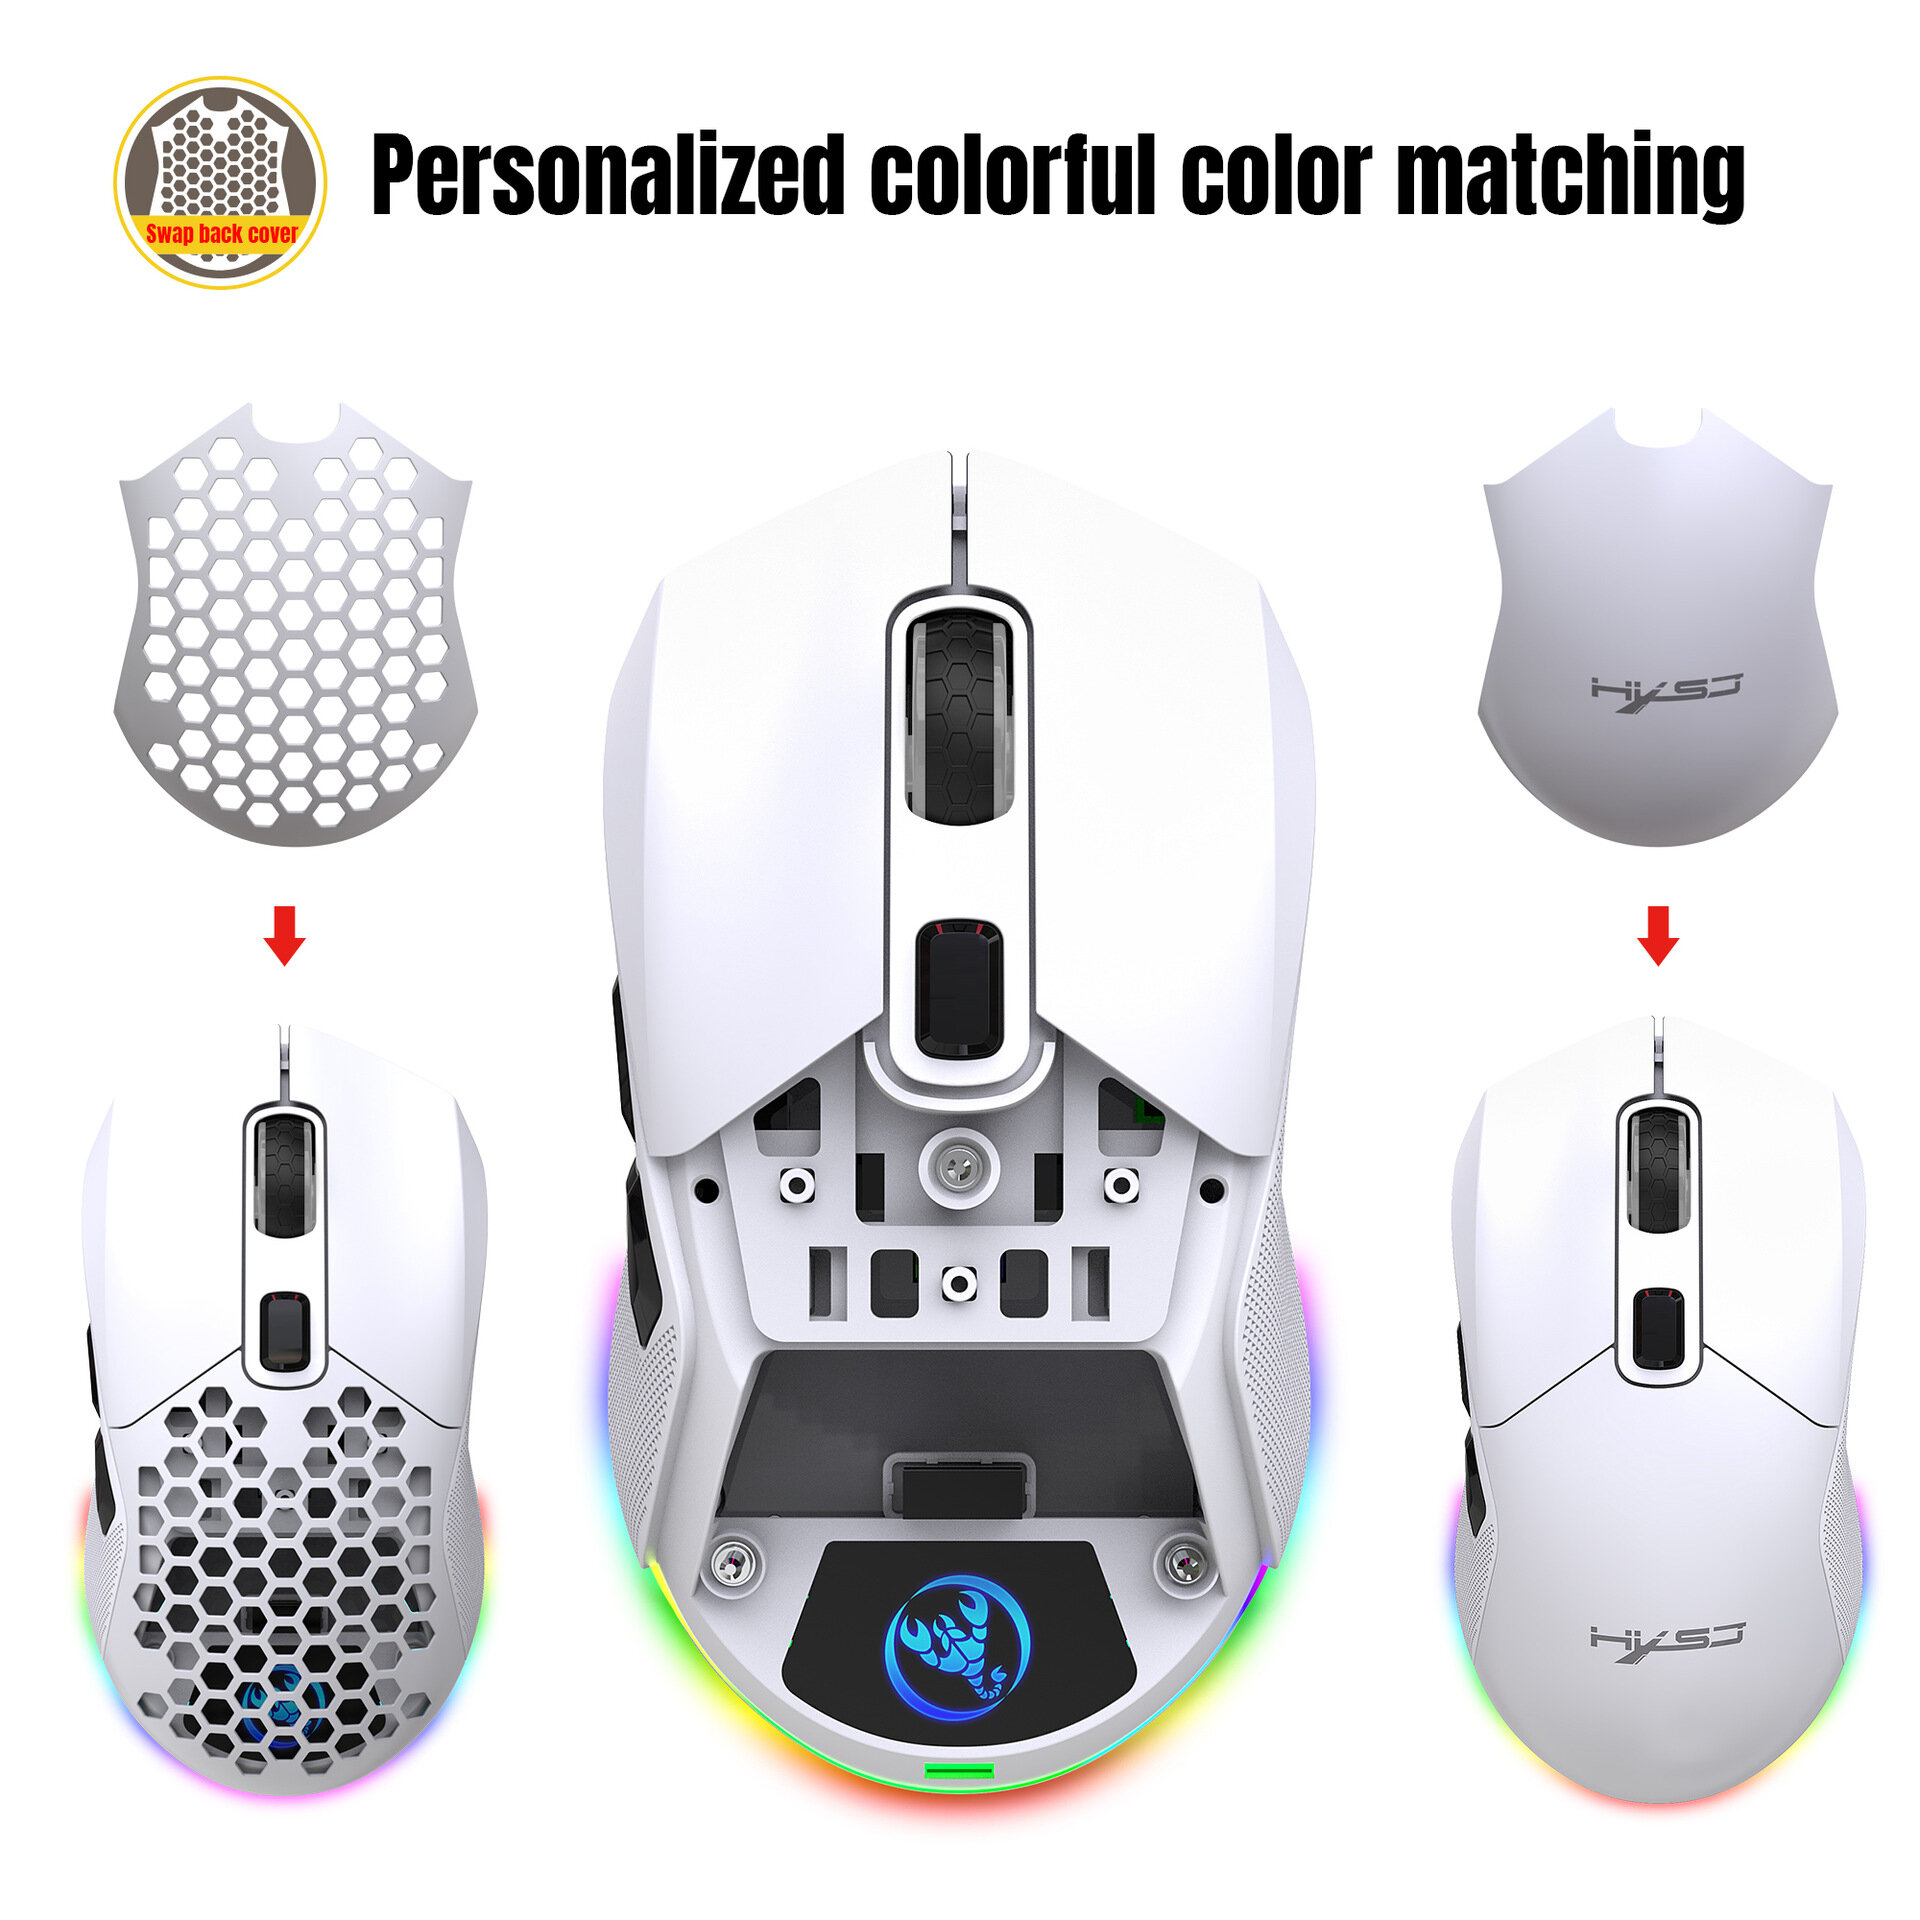 HXSJ T28 Hollow Wireless Mouse Rechargeable RGB Luminous 4800DPI Interchangeable Back Cover Gaming Lightweight Mouse COD